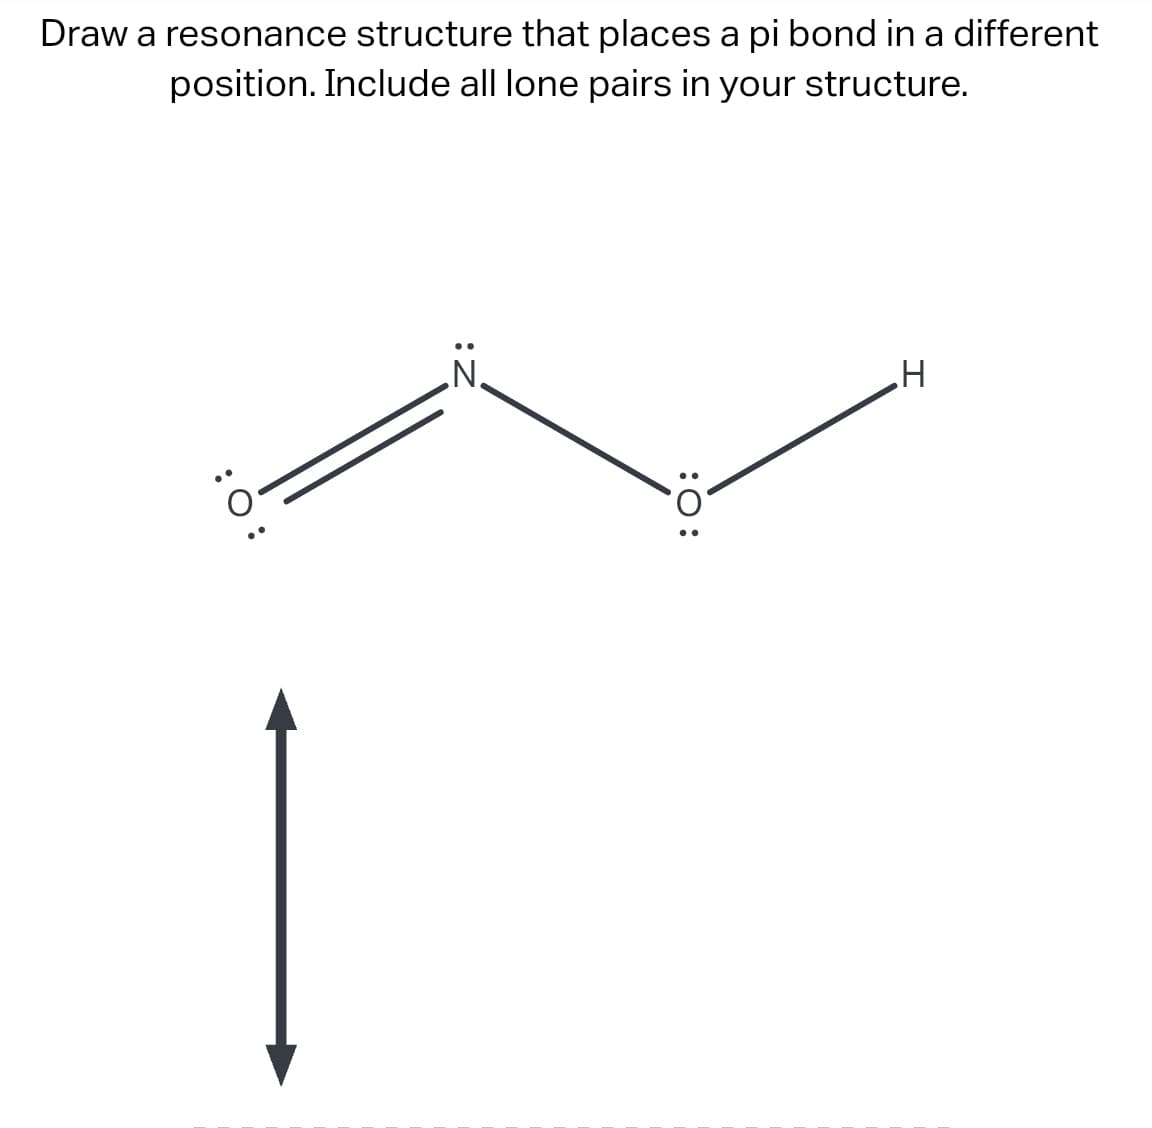 Draw a resonance structure that places a pi bond in a different
position. Include all lone pairs in your structure.
:O:
:O:
H